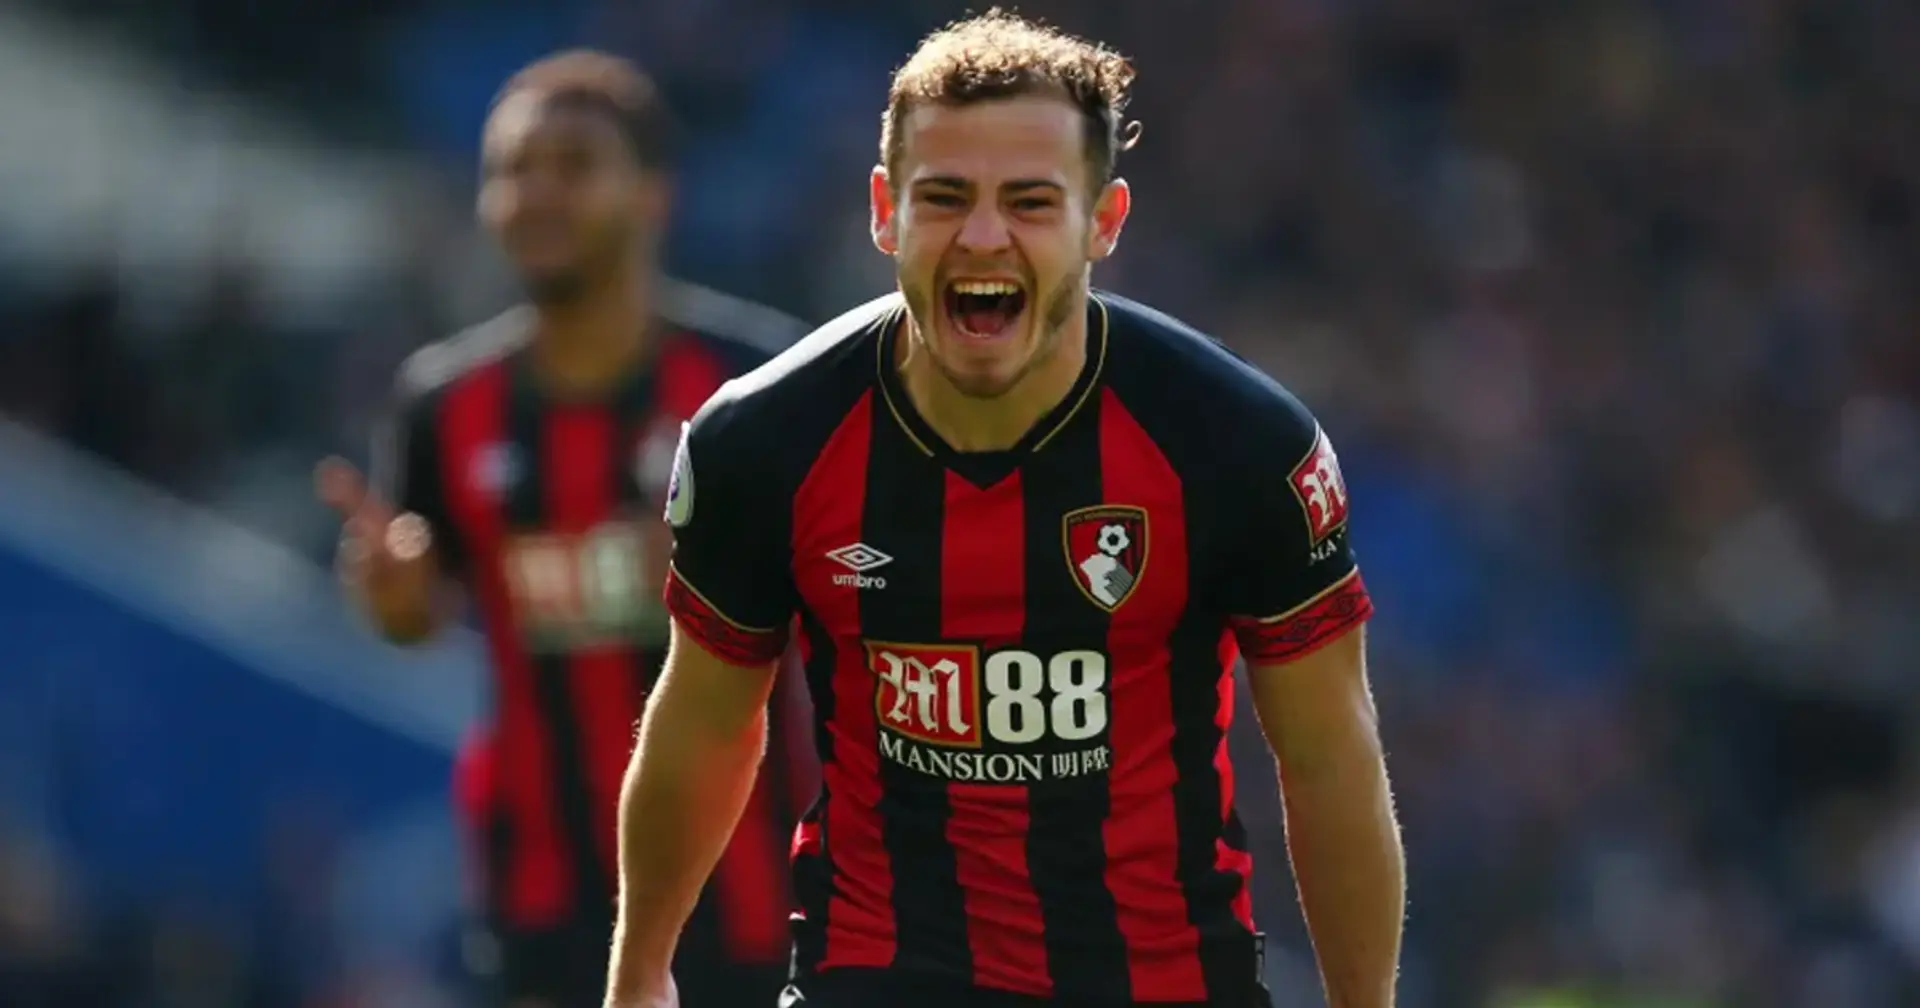 THURSDAY TRANSFER: Would Ryan Fraser be a good addition to Arsenal?